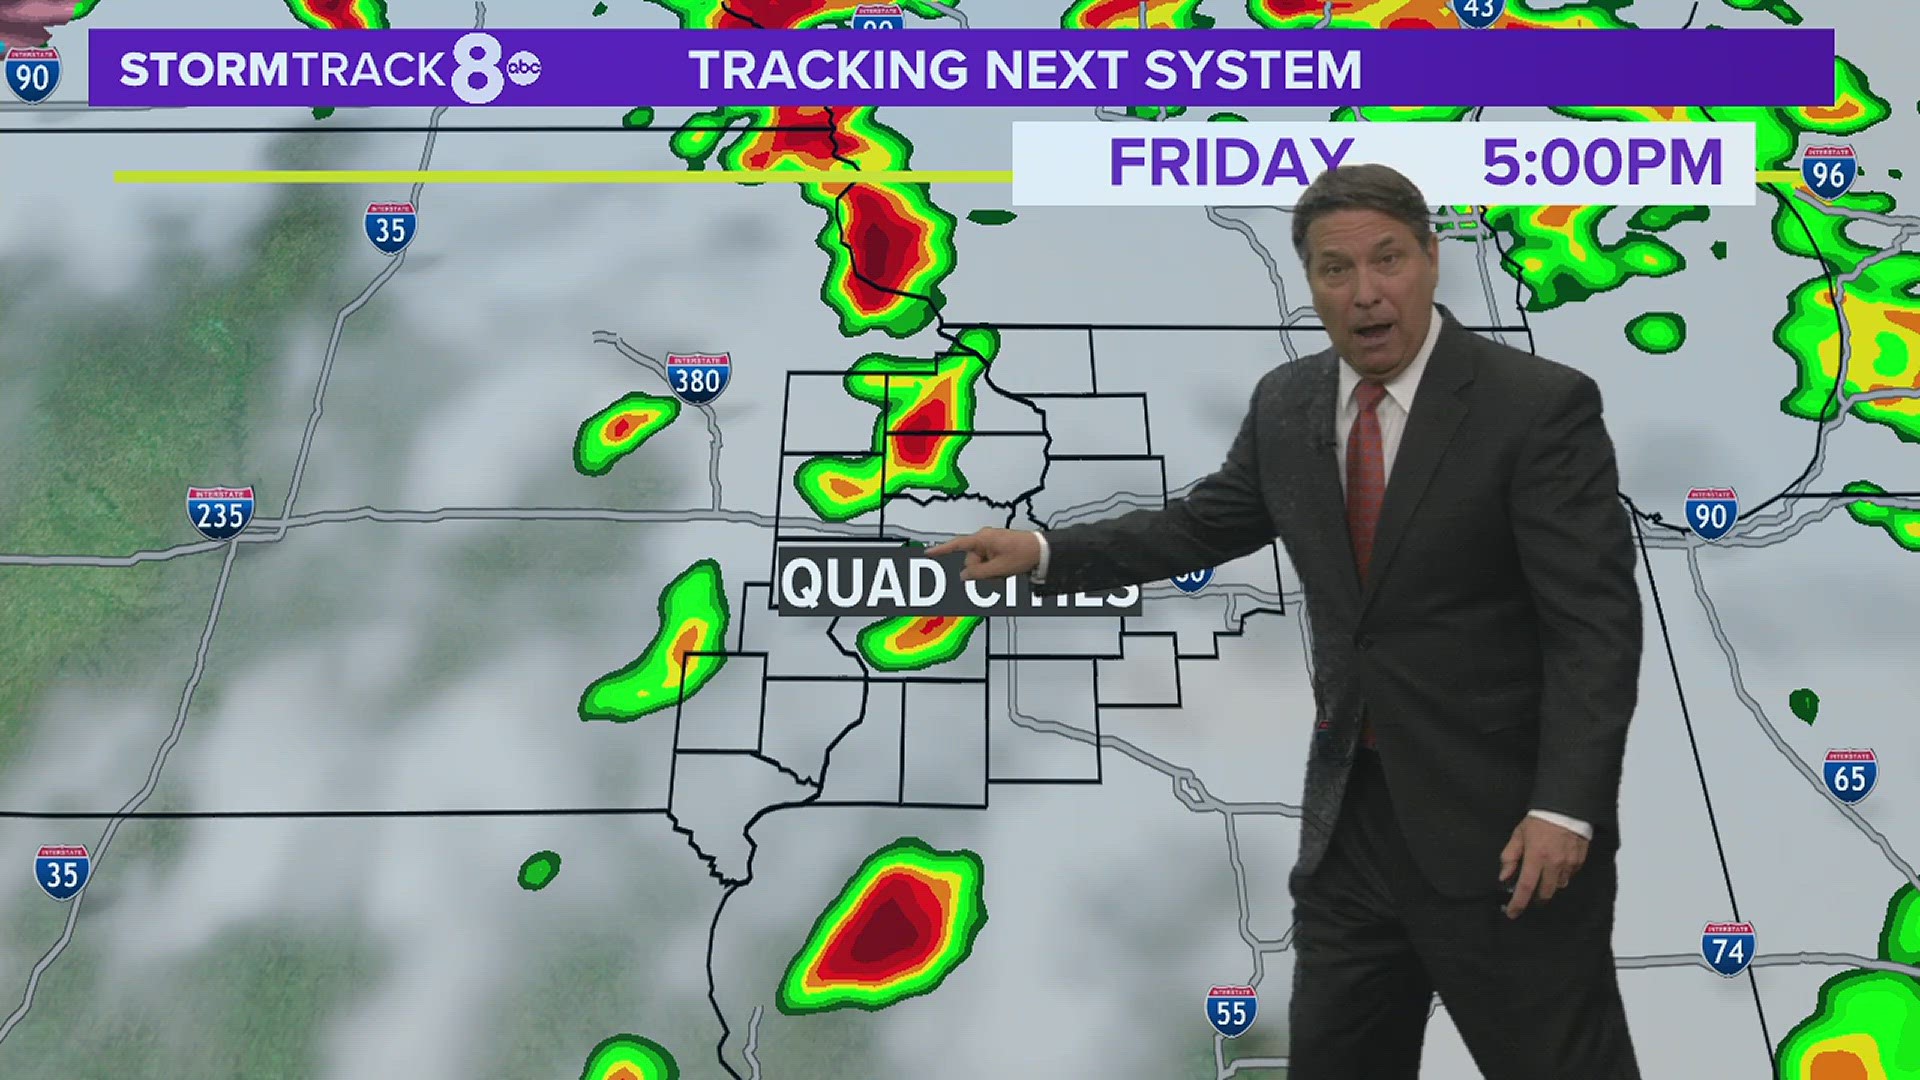 Severe weather still on track for later Friday.